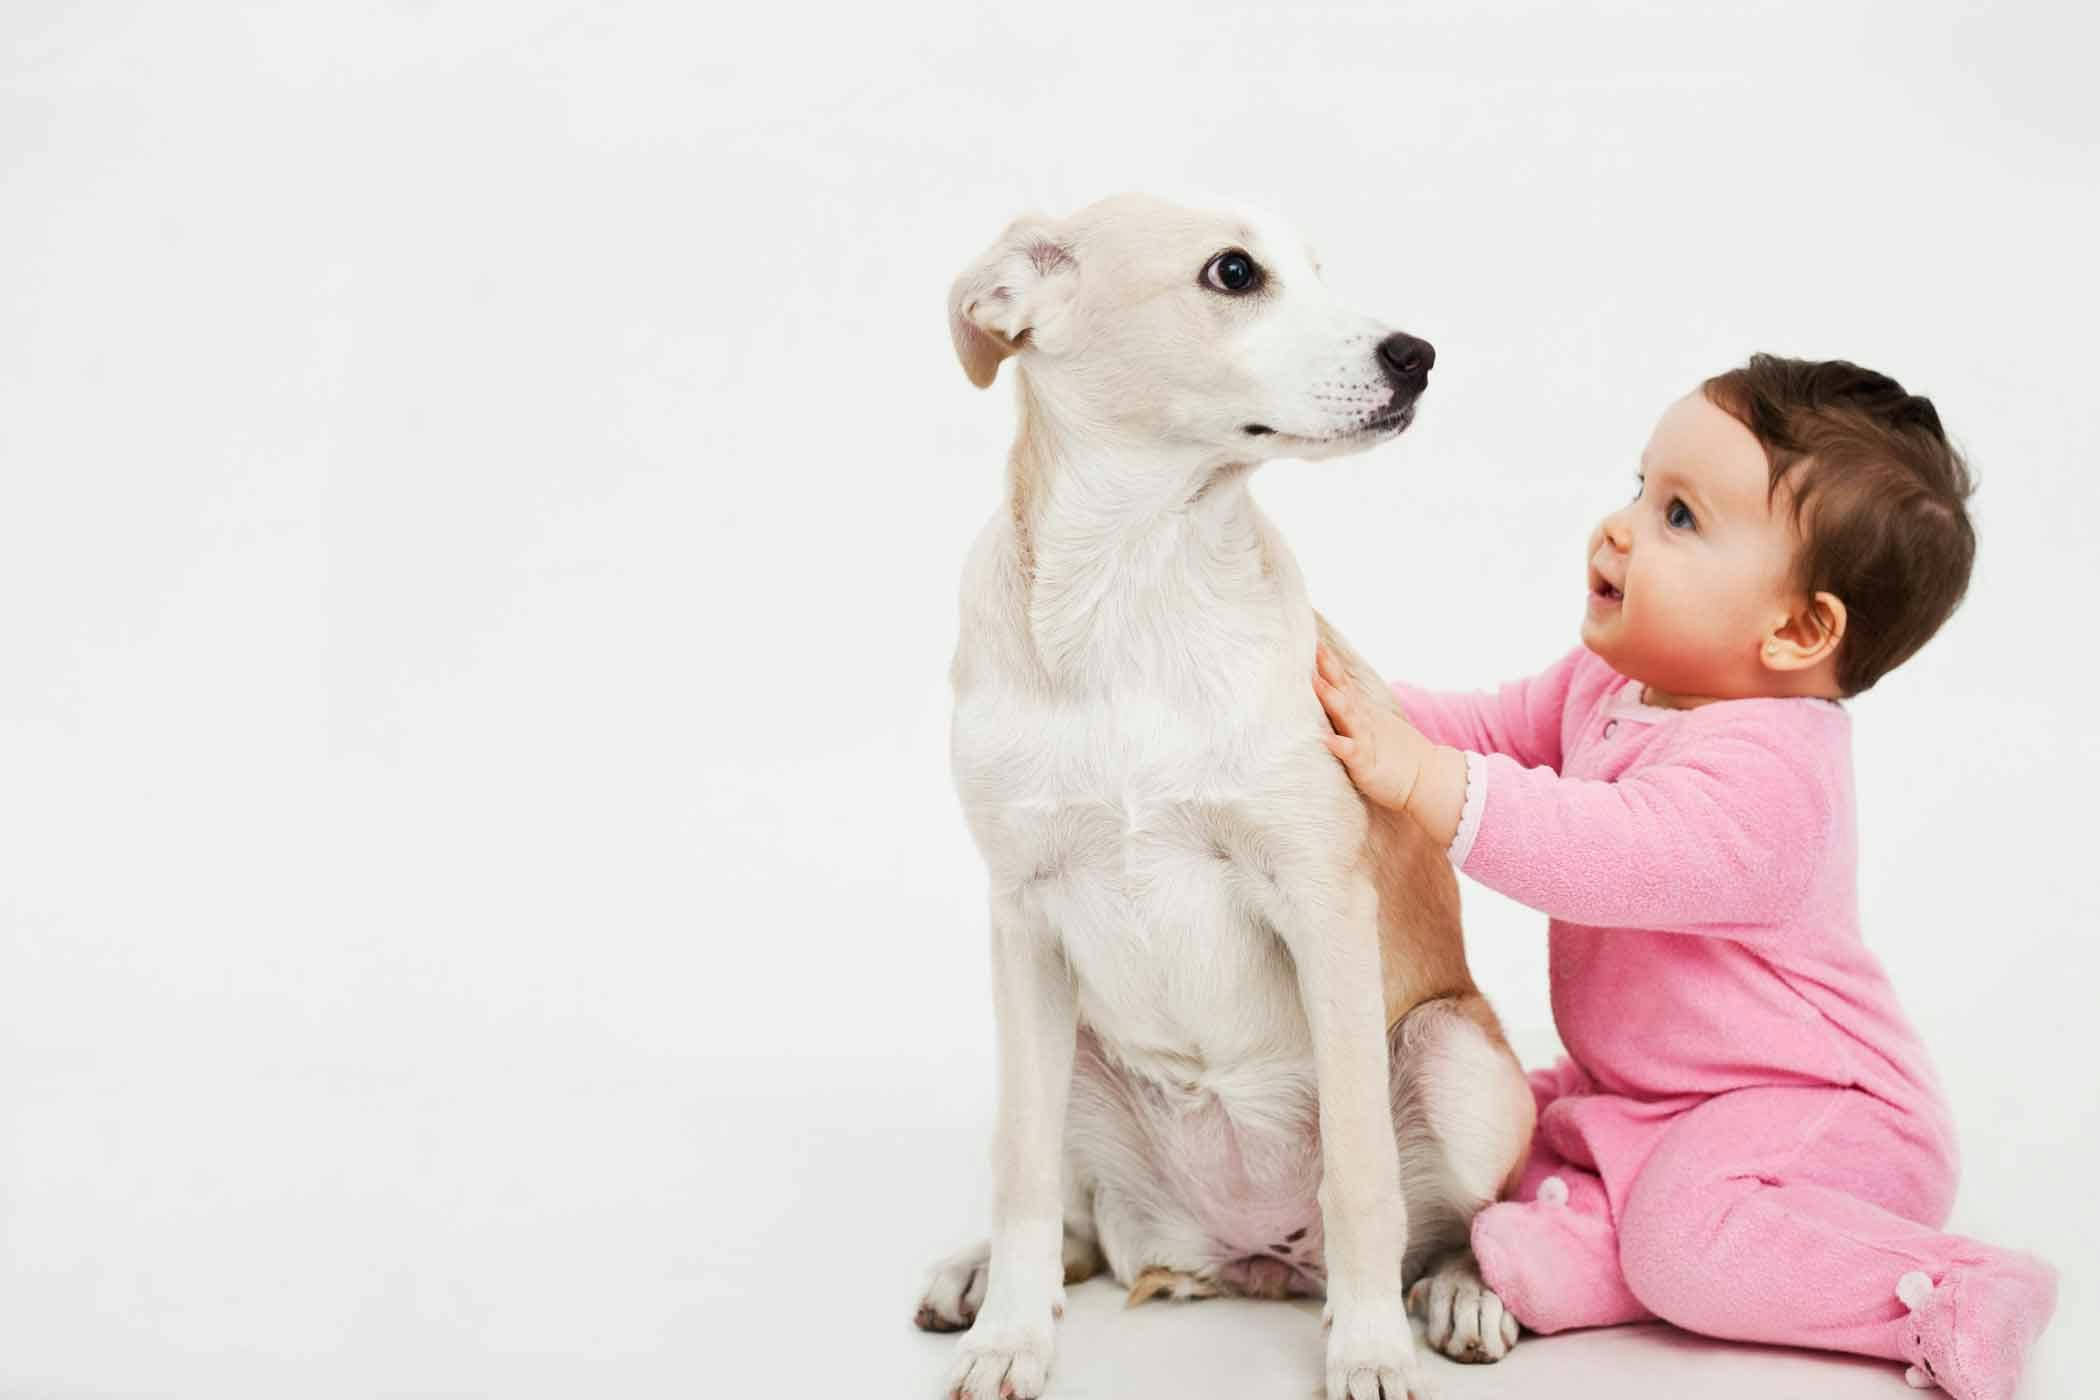 How to Train Your Dog to Stay Away from a Baby